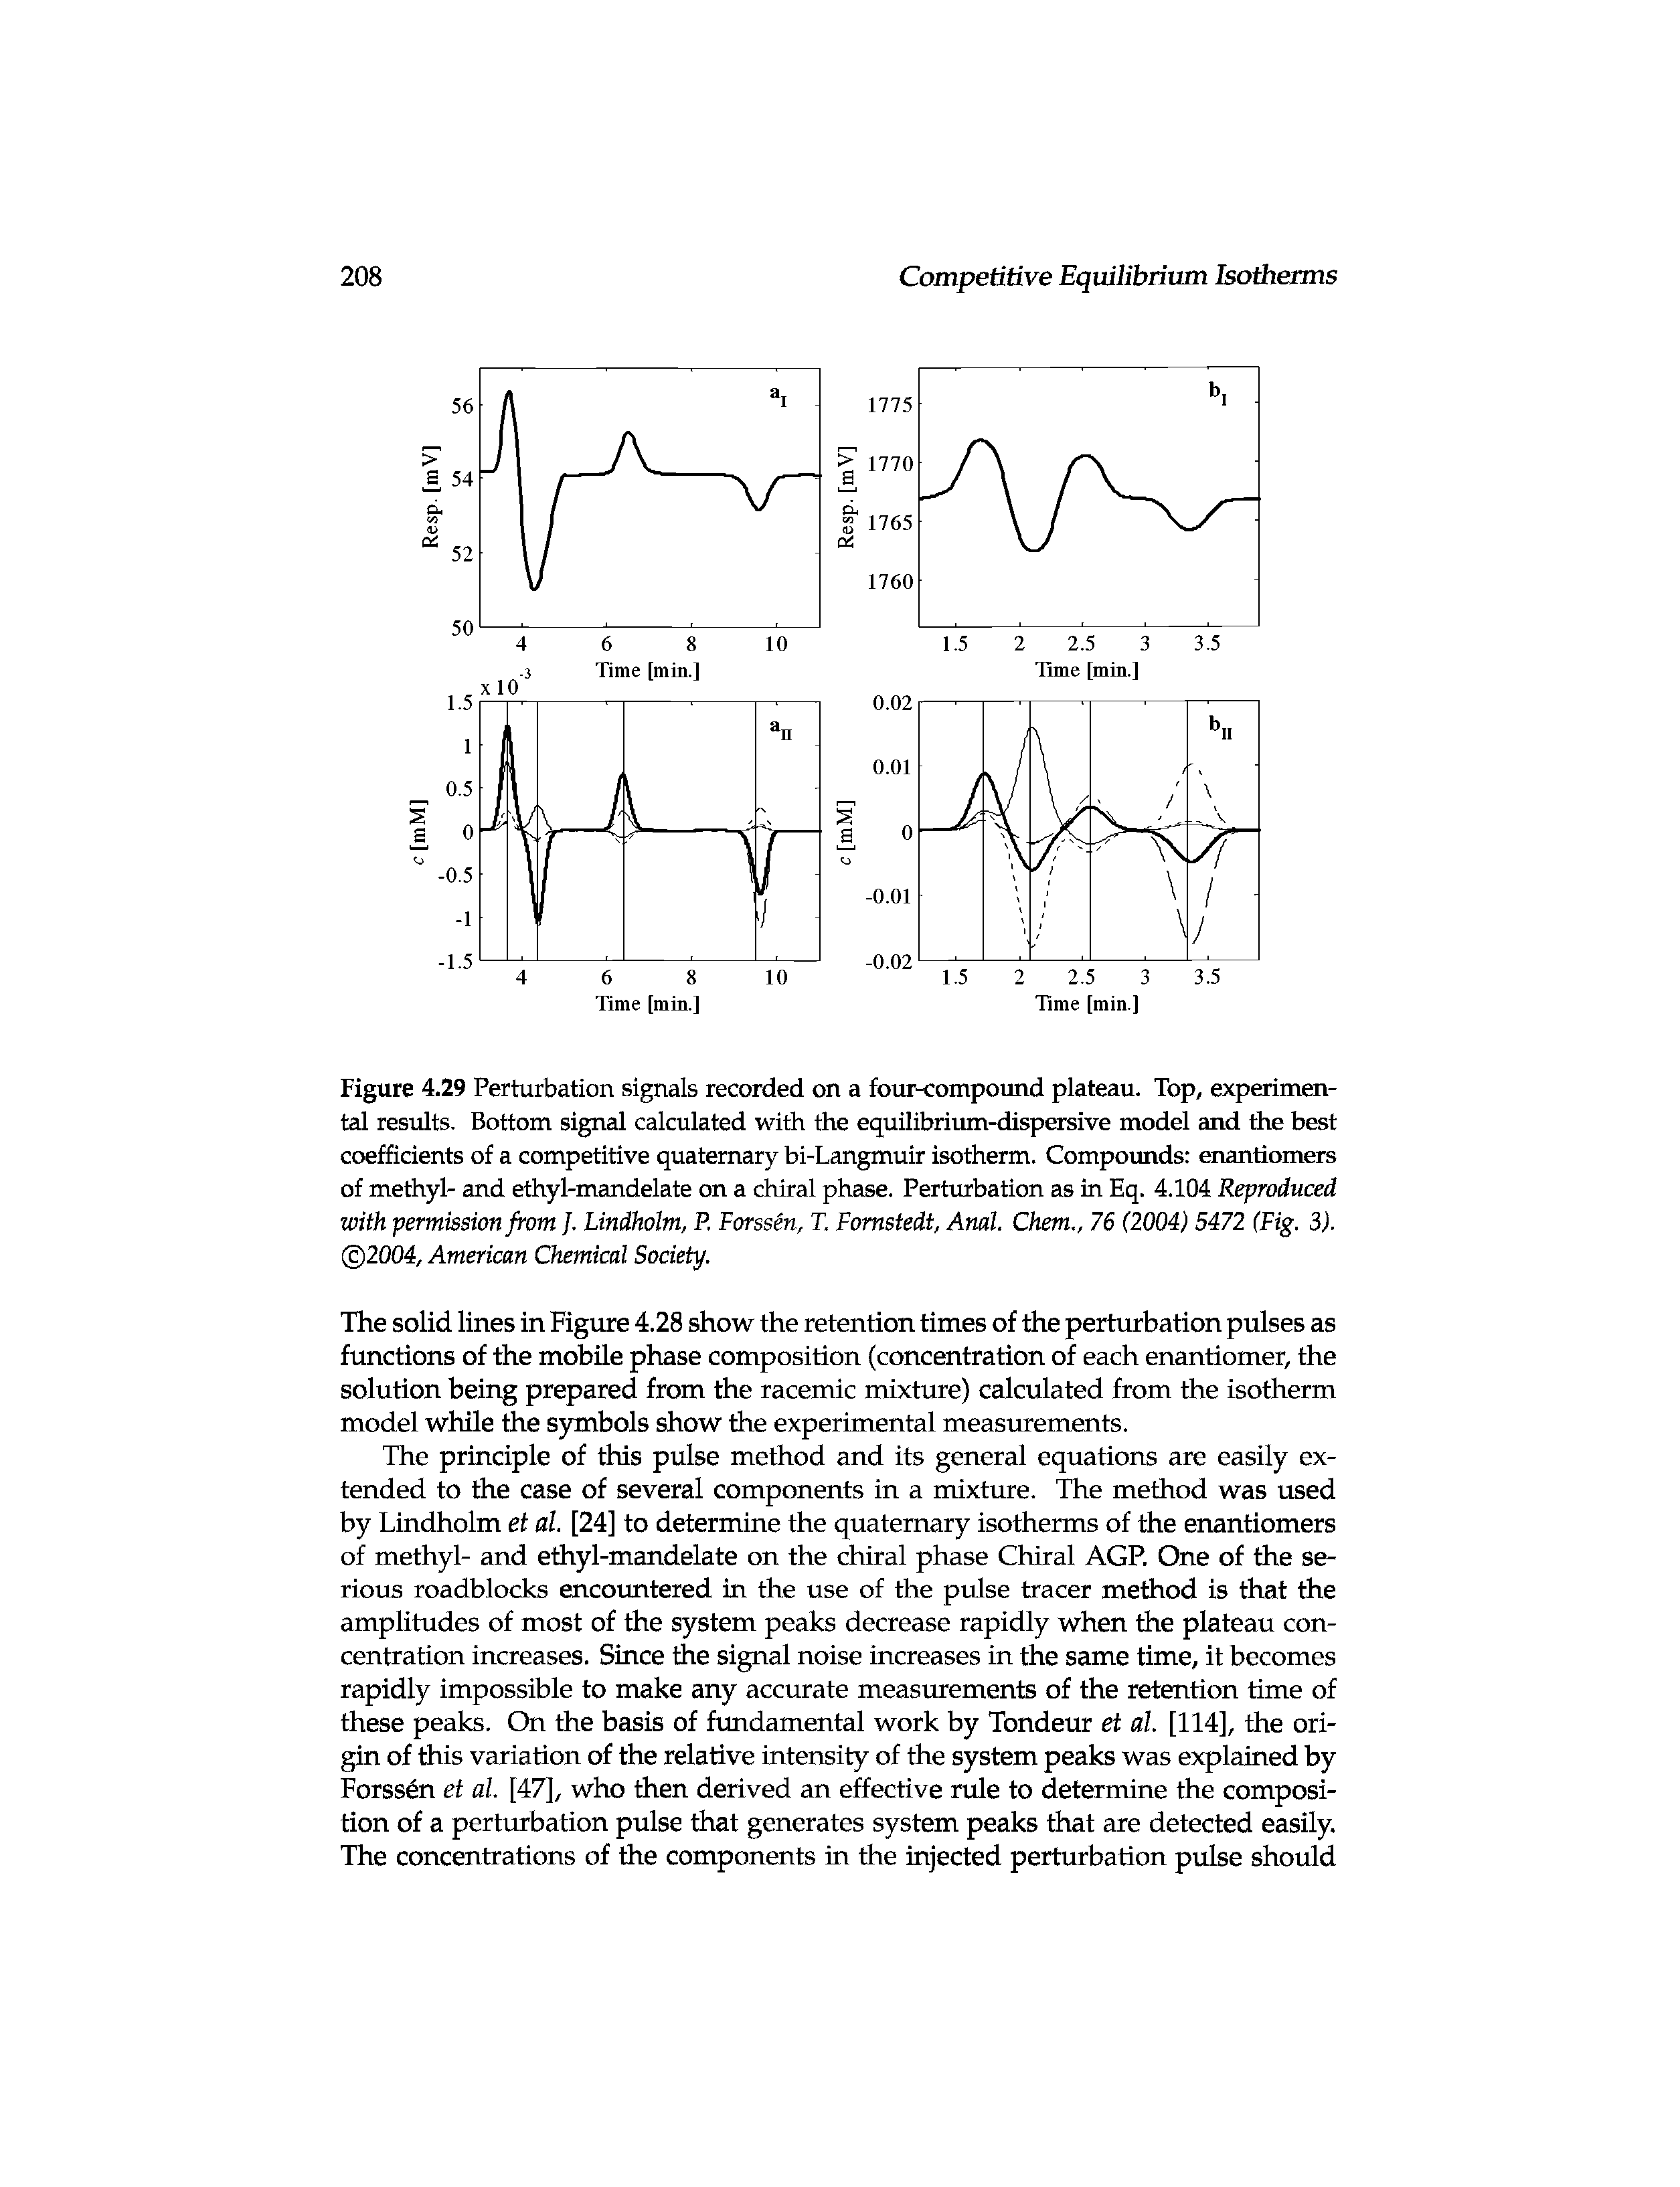 Figure 4.29 Perturbation signals recorded on a four-compound plateau. Top, experimental results. Bottom signal calculated with the equilibrium-dispersive model and the best coefficients of a competitive quaternary bi-Langmuir isotherm. Compoxmds enantiomers of methyl- and ethyl-mandelate on a chiral phase. Perturbation as in Eq. 4.104 Reproduced with permission from J. Lindholm, P. Porssen, T. Fomstedt, Anal. Chem., 76 (2004) 5472 (Fig. 3). 2004, American Chemical Society.